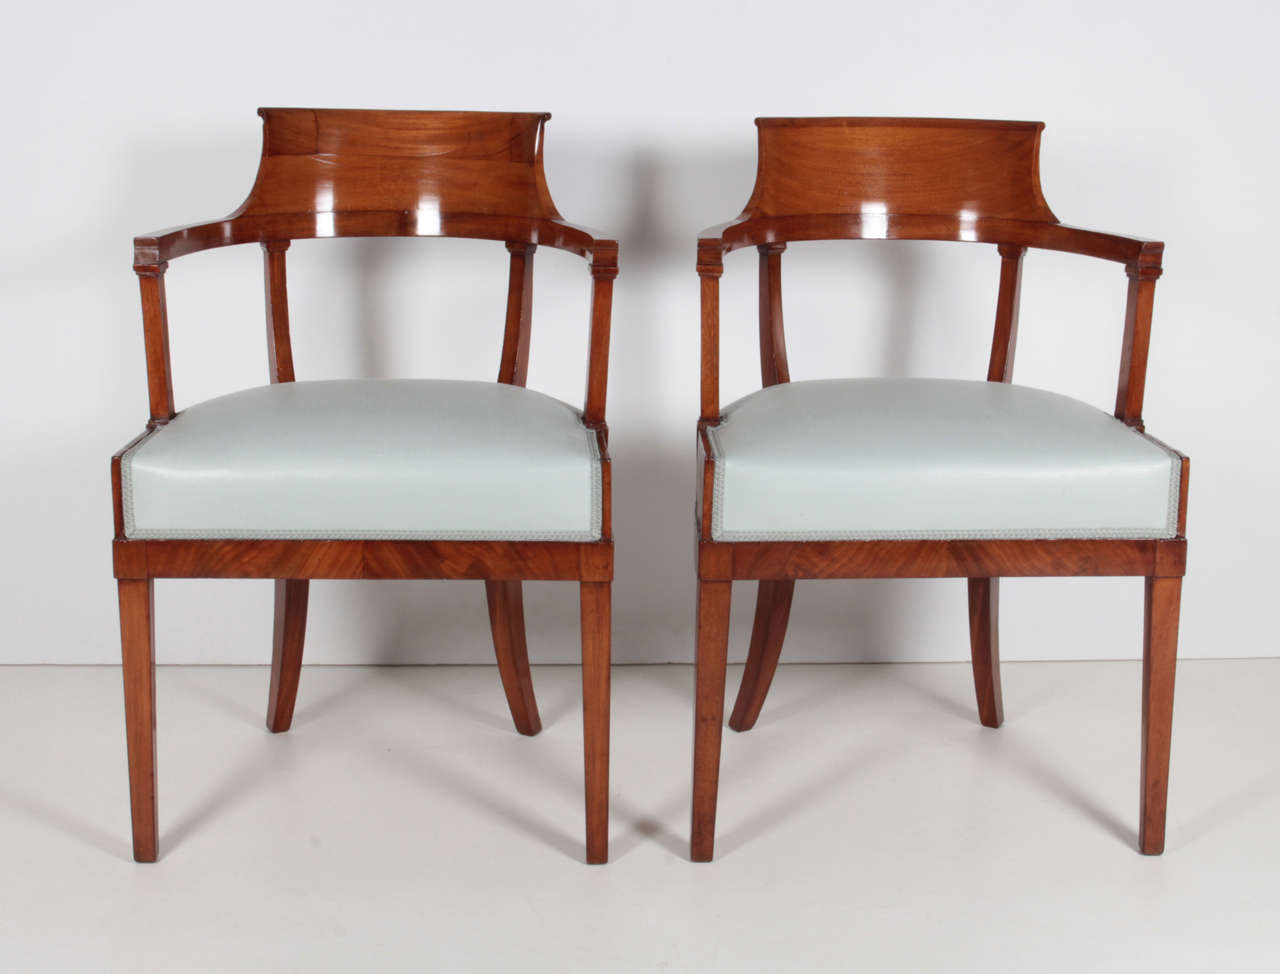 A pair of Swedish mahogany chairs, Late 19th Century, by Alfred Grenander - Architect. Born. Skovde, Sweden circa 1863 - Died -  Berlin, Germany 1931. with a scrolled and curved backrest, above a wide frieze and upholstered seat, on square tapering